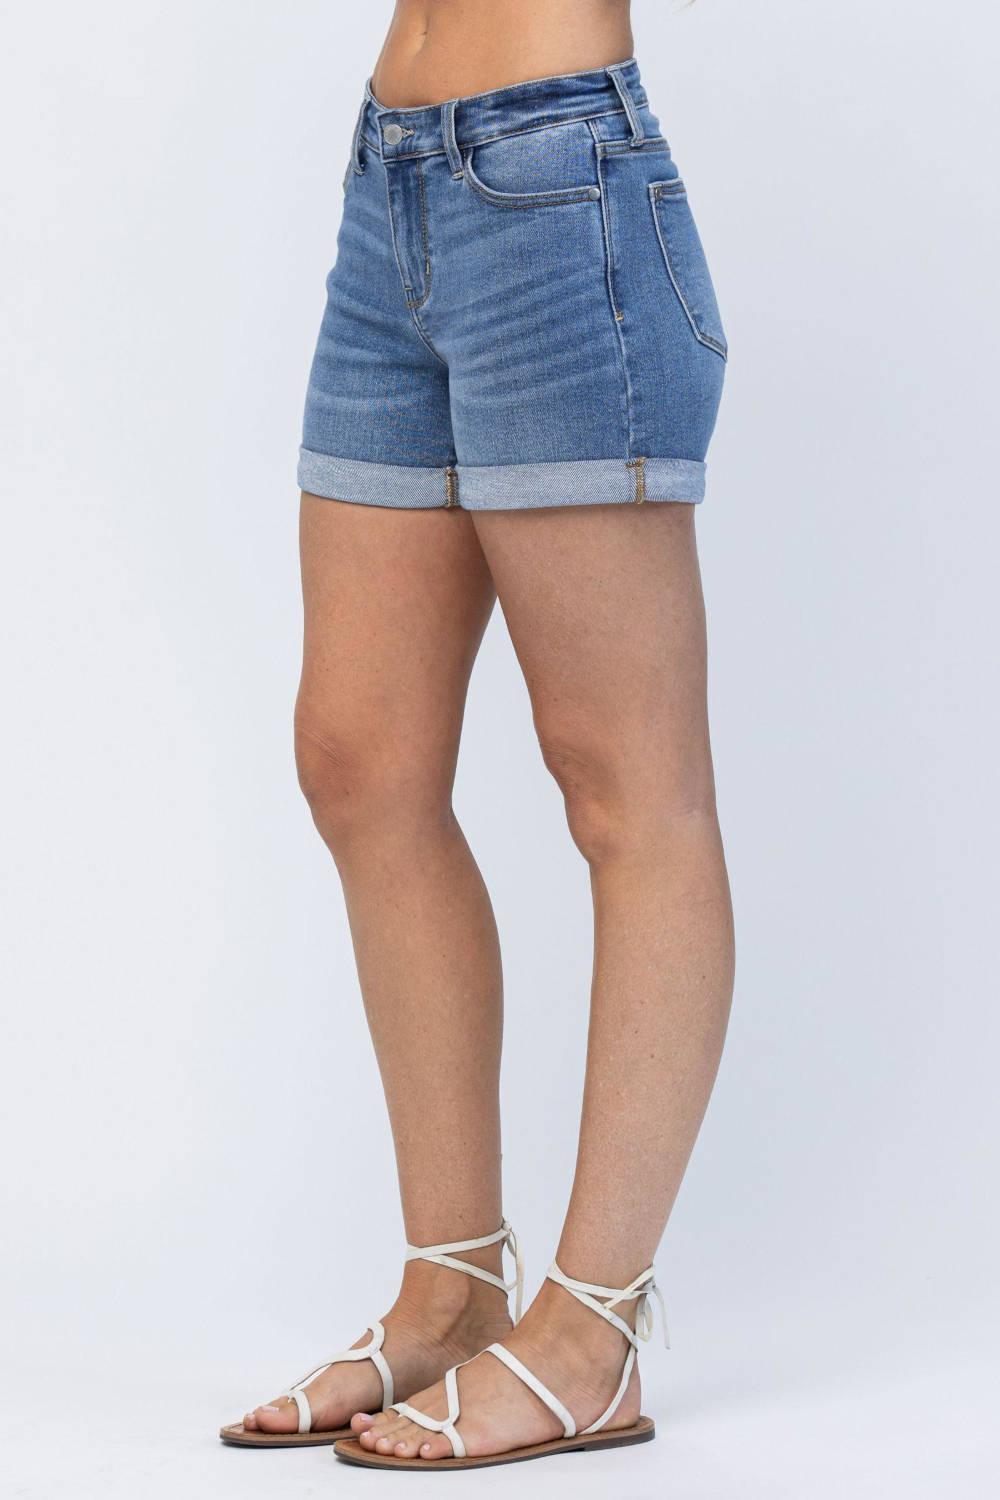 Judy Blue Classic Cuffed Shorts - Strawberry Moon Boutique